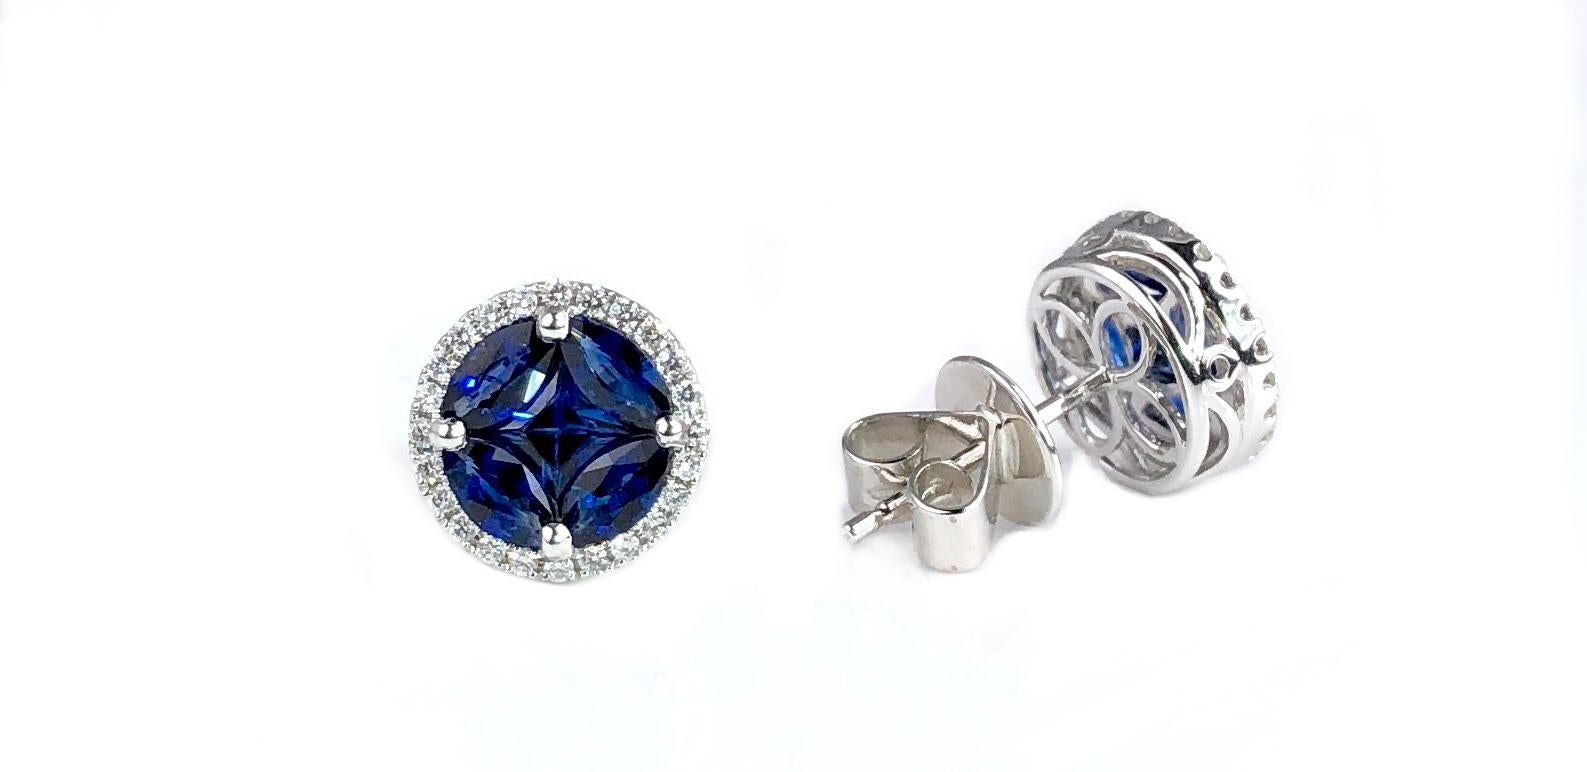 (DiamondTown) These round stud earrings feature a cluster center of blue sapphires (total weight 1.90 carats), surrounded by a halo of round white diamonds (total weight 0.22 carats).

Set in 18k White Gold

This style is available in other